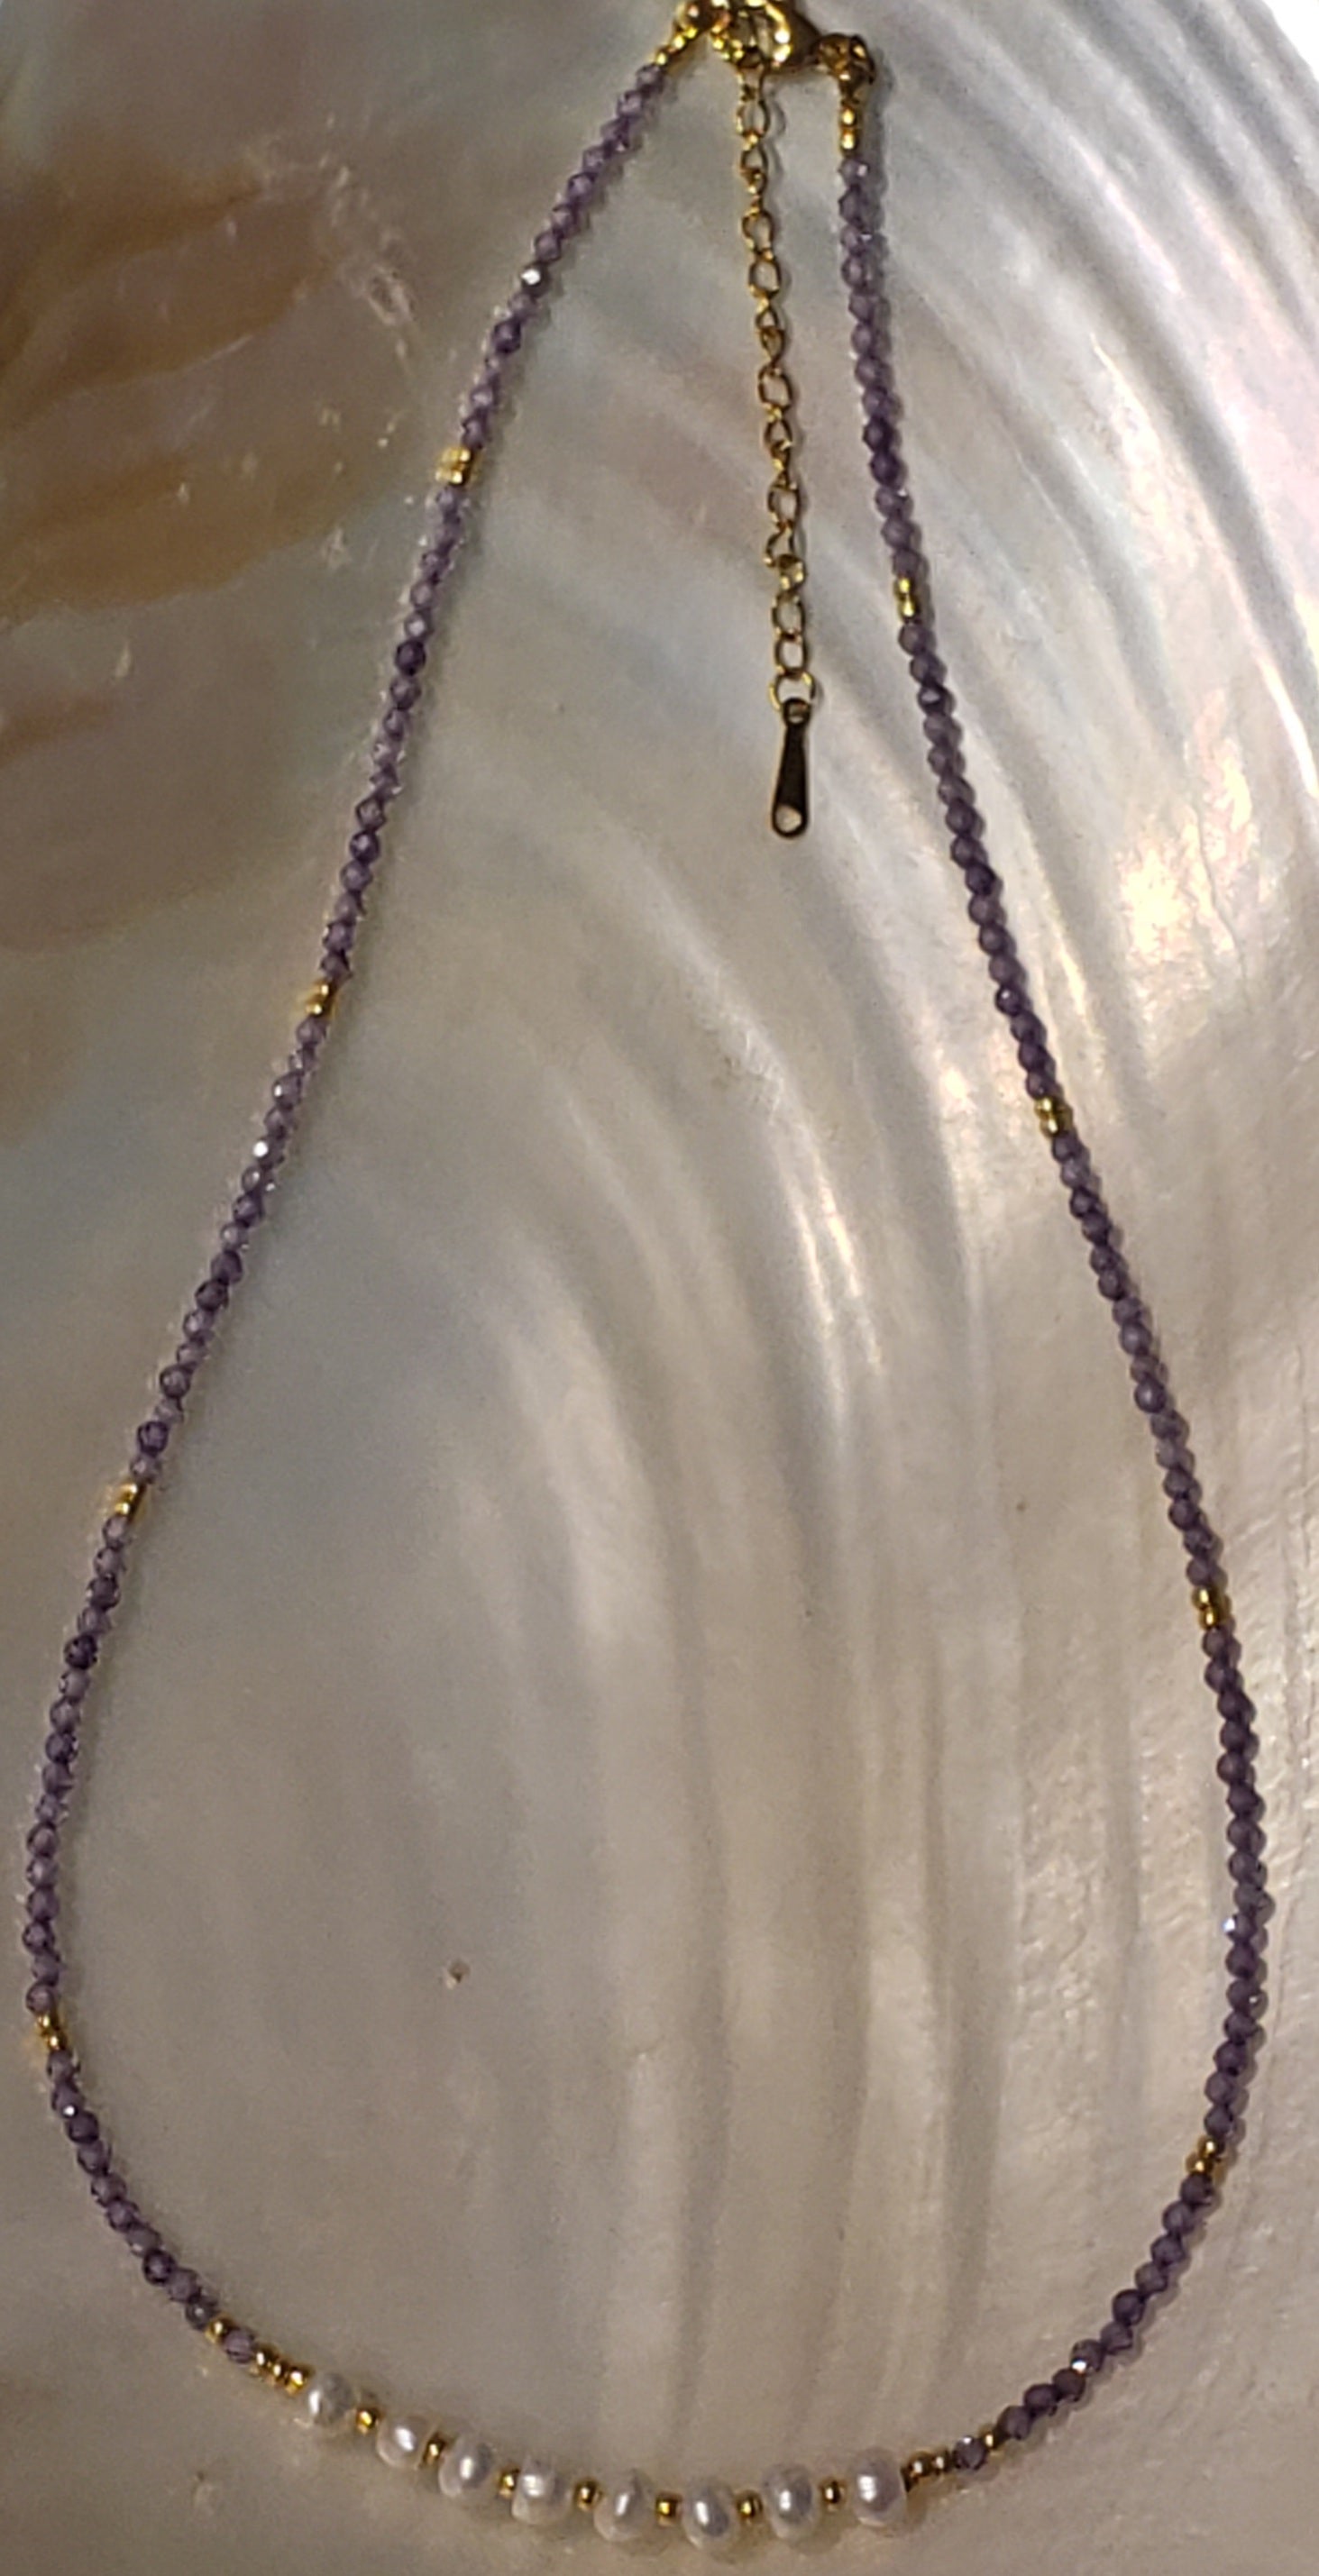 Necklace Amethyst Gemstone and 8 Fresh Water Pearls Gold Filled